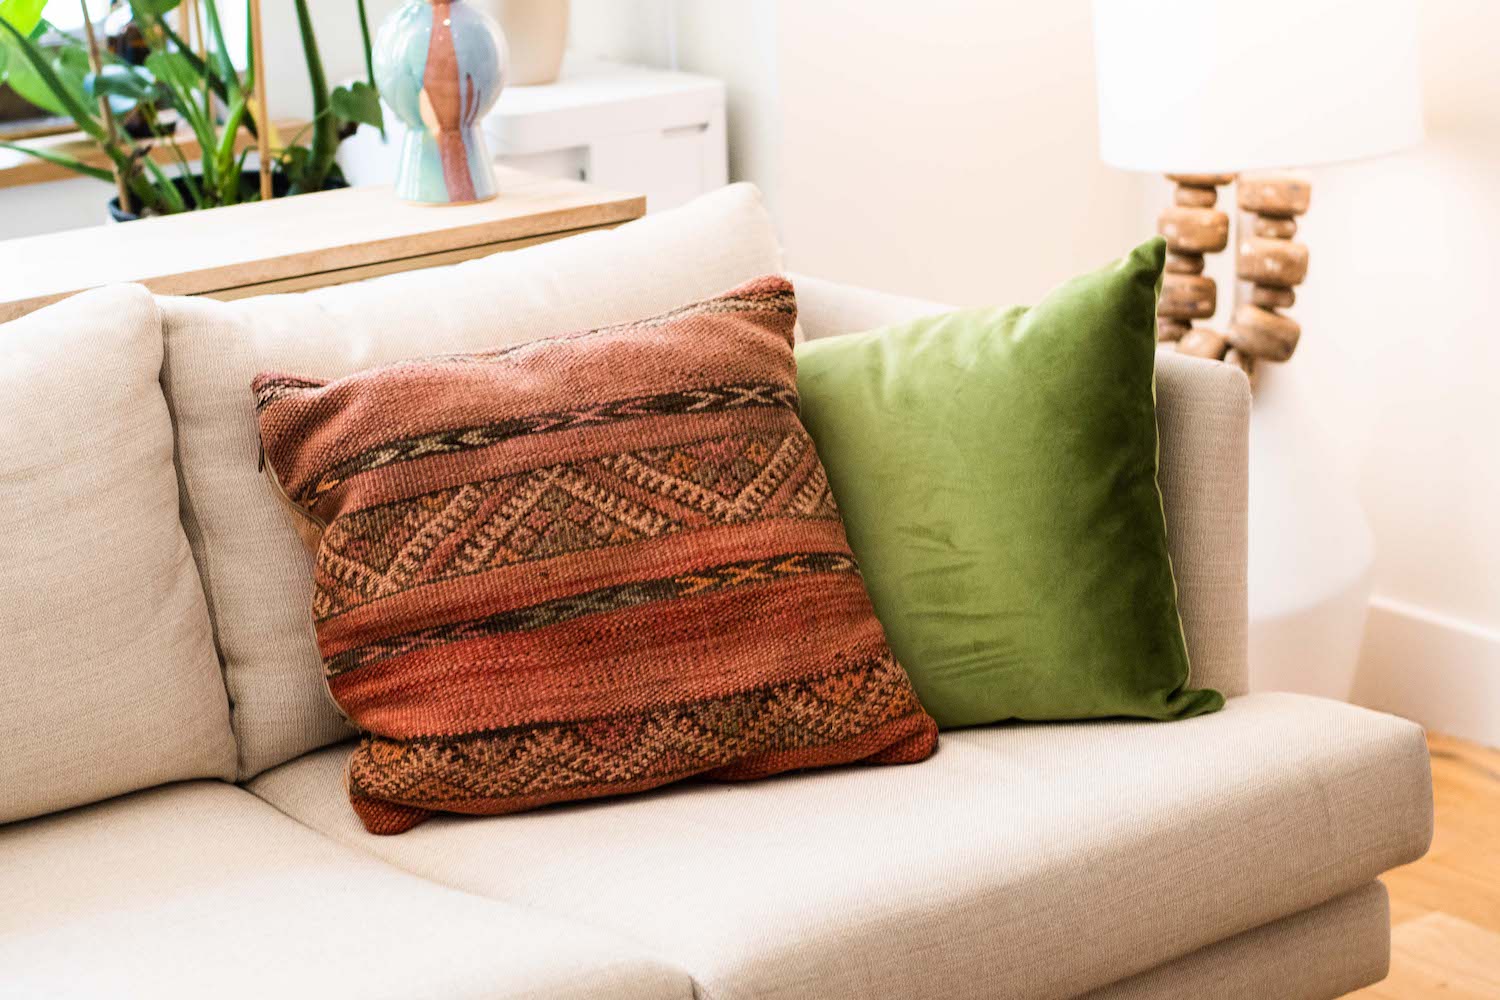 Two pillows, one orange and patterned and the other green, sitting in the corner of a beige couch in a brightly lit room.